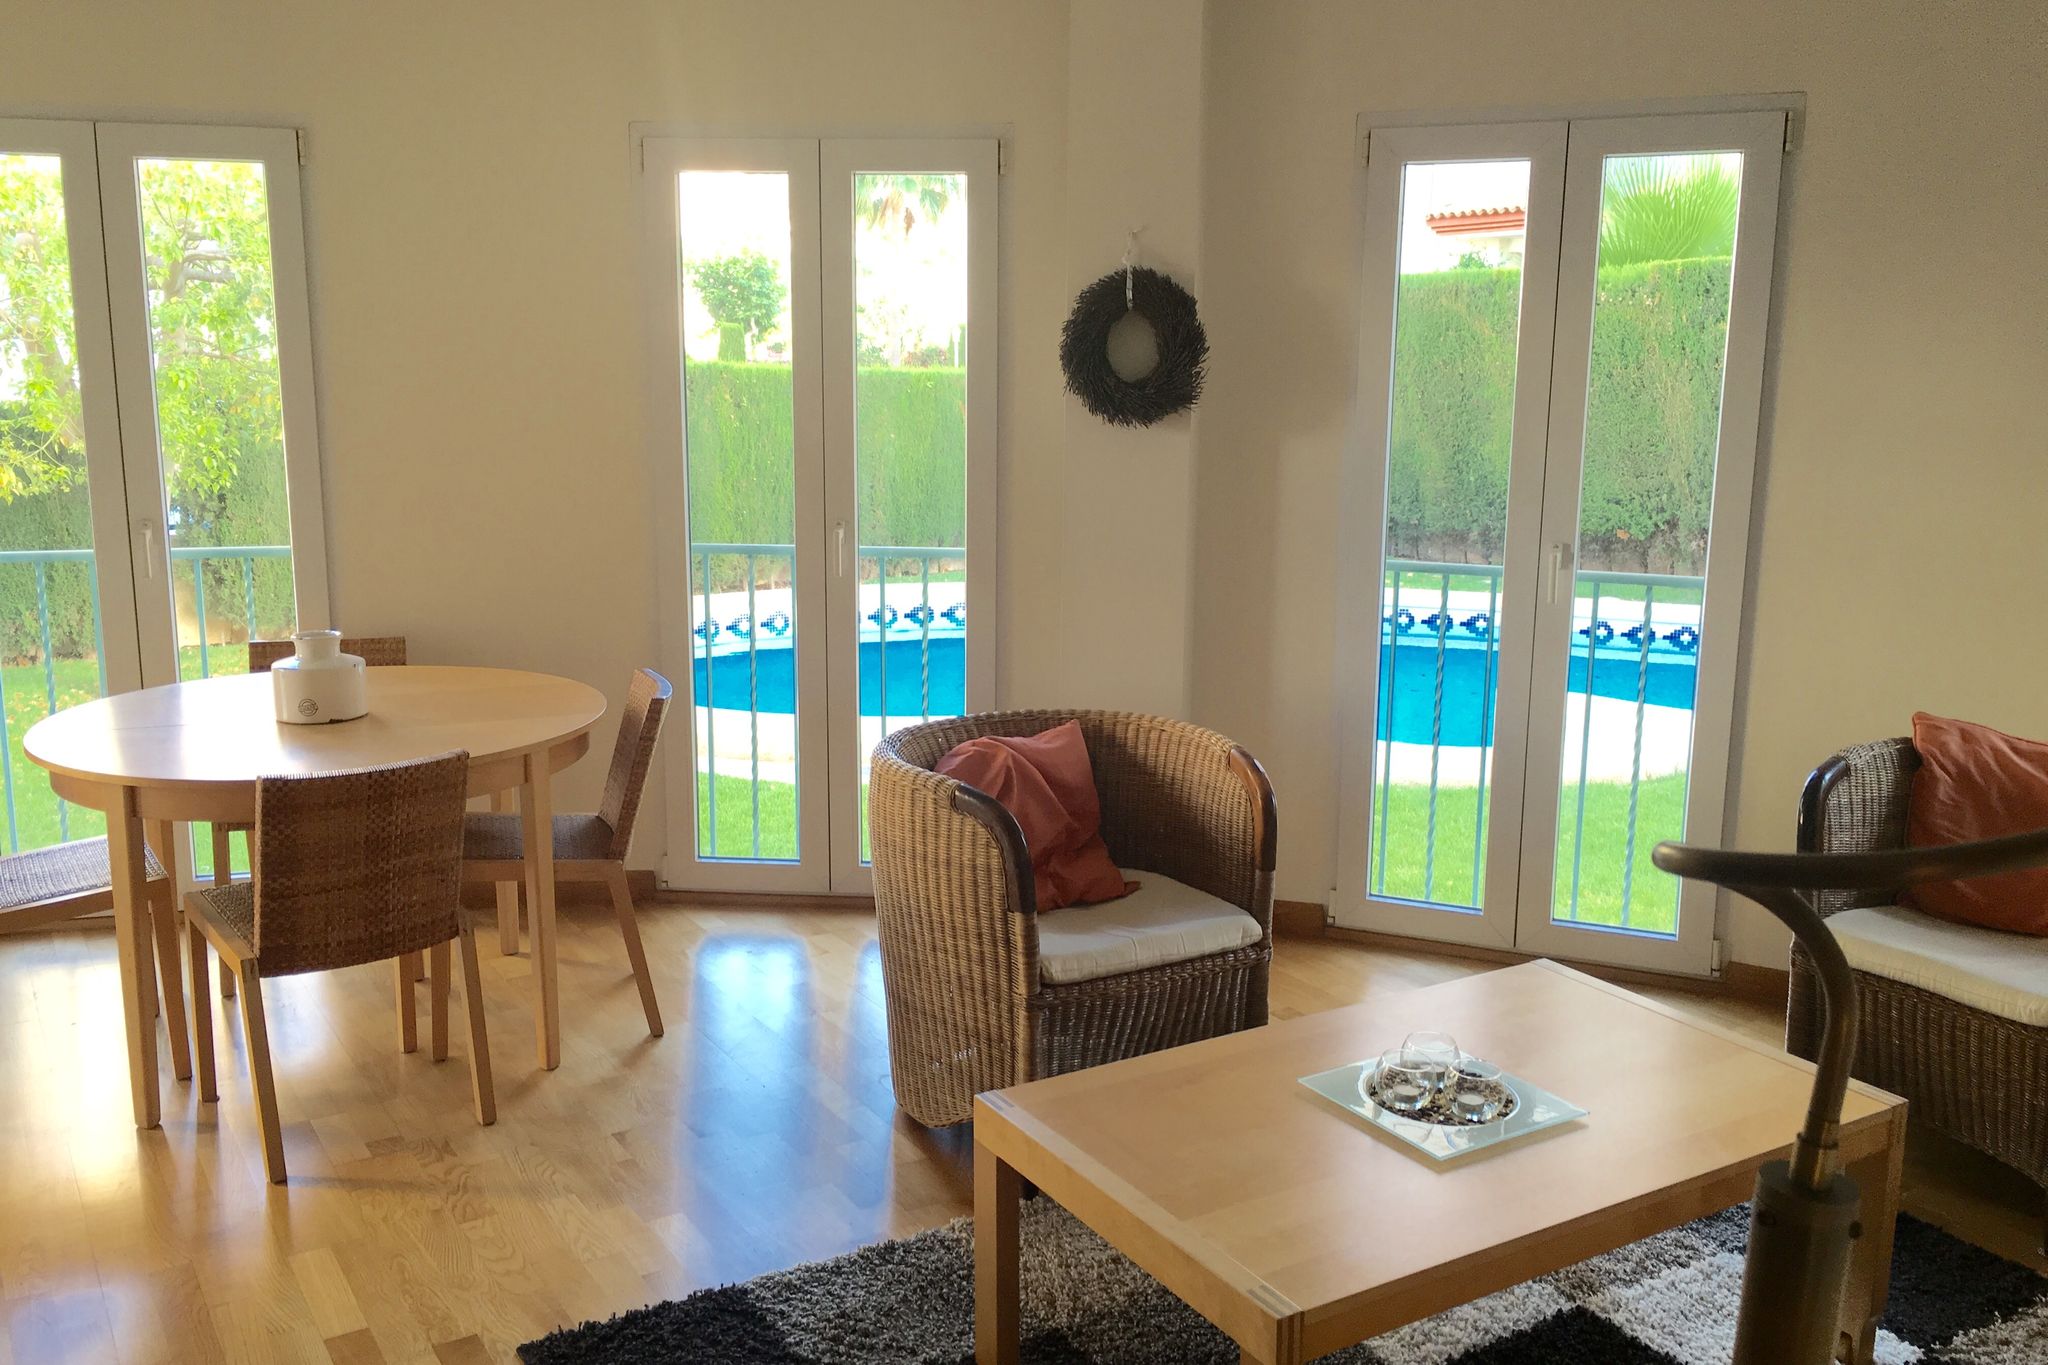 Light apartment with communal pool and walking distance to the beach